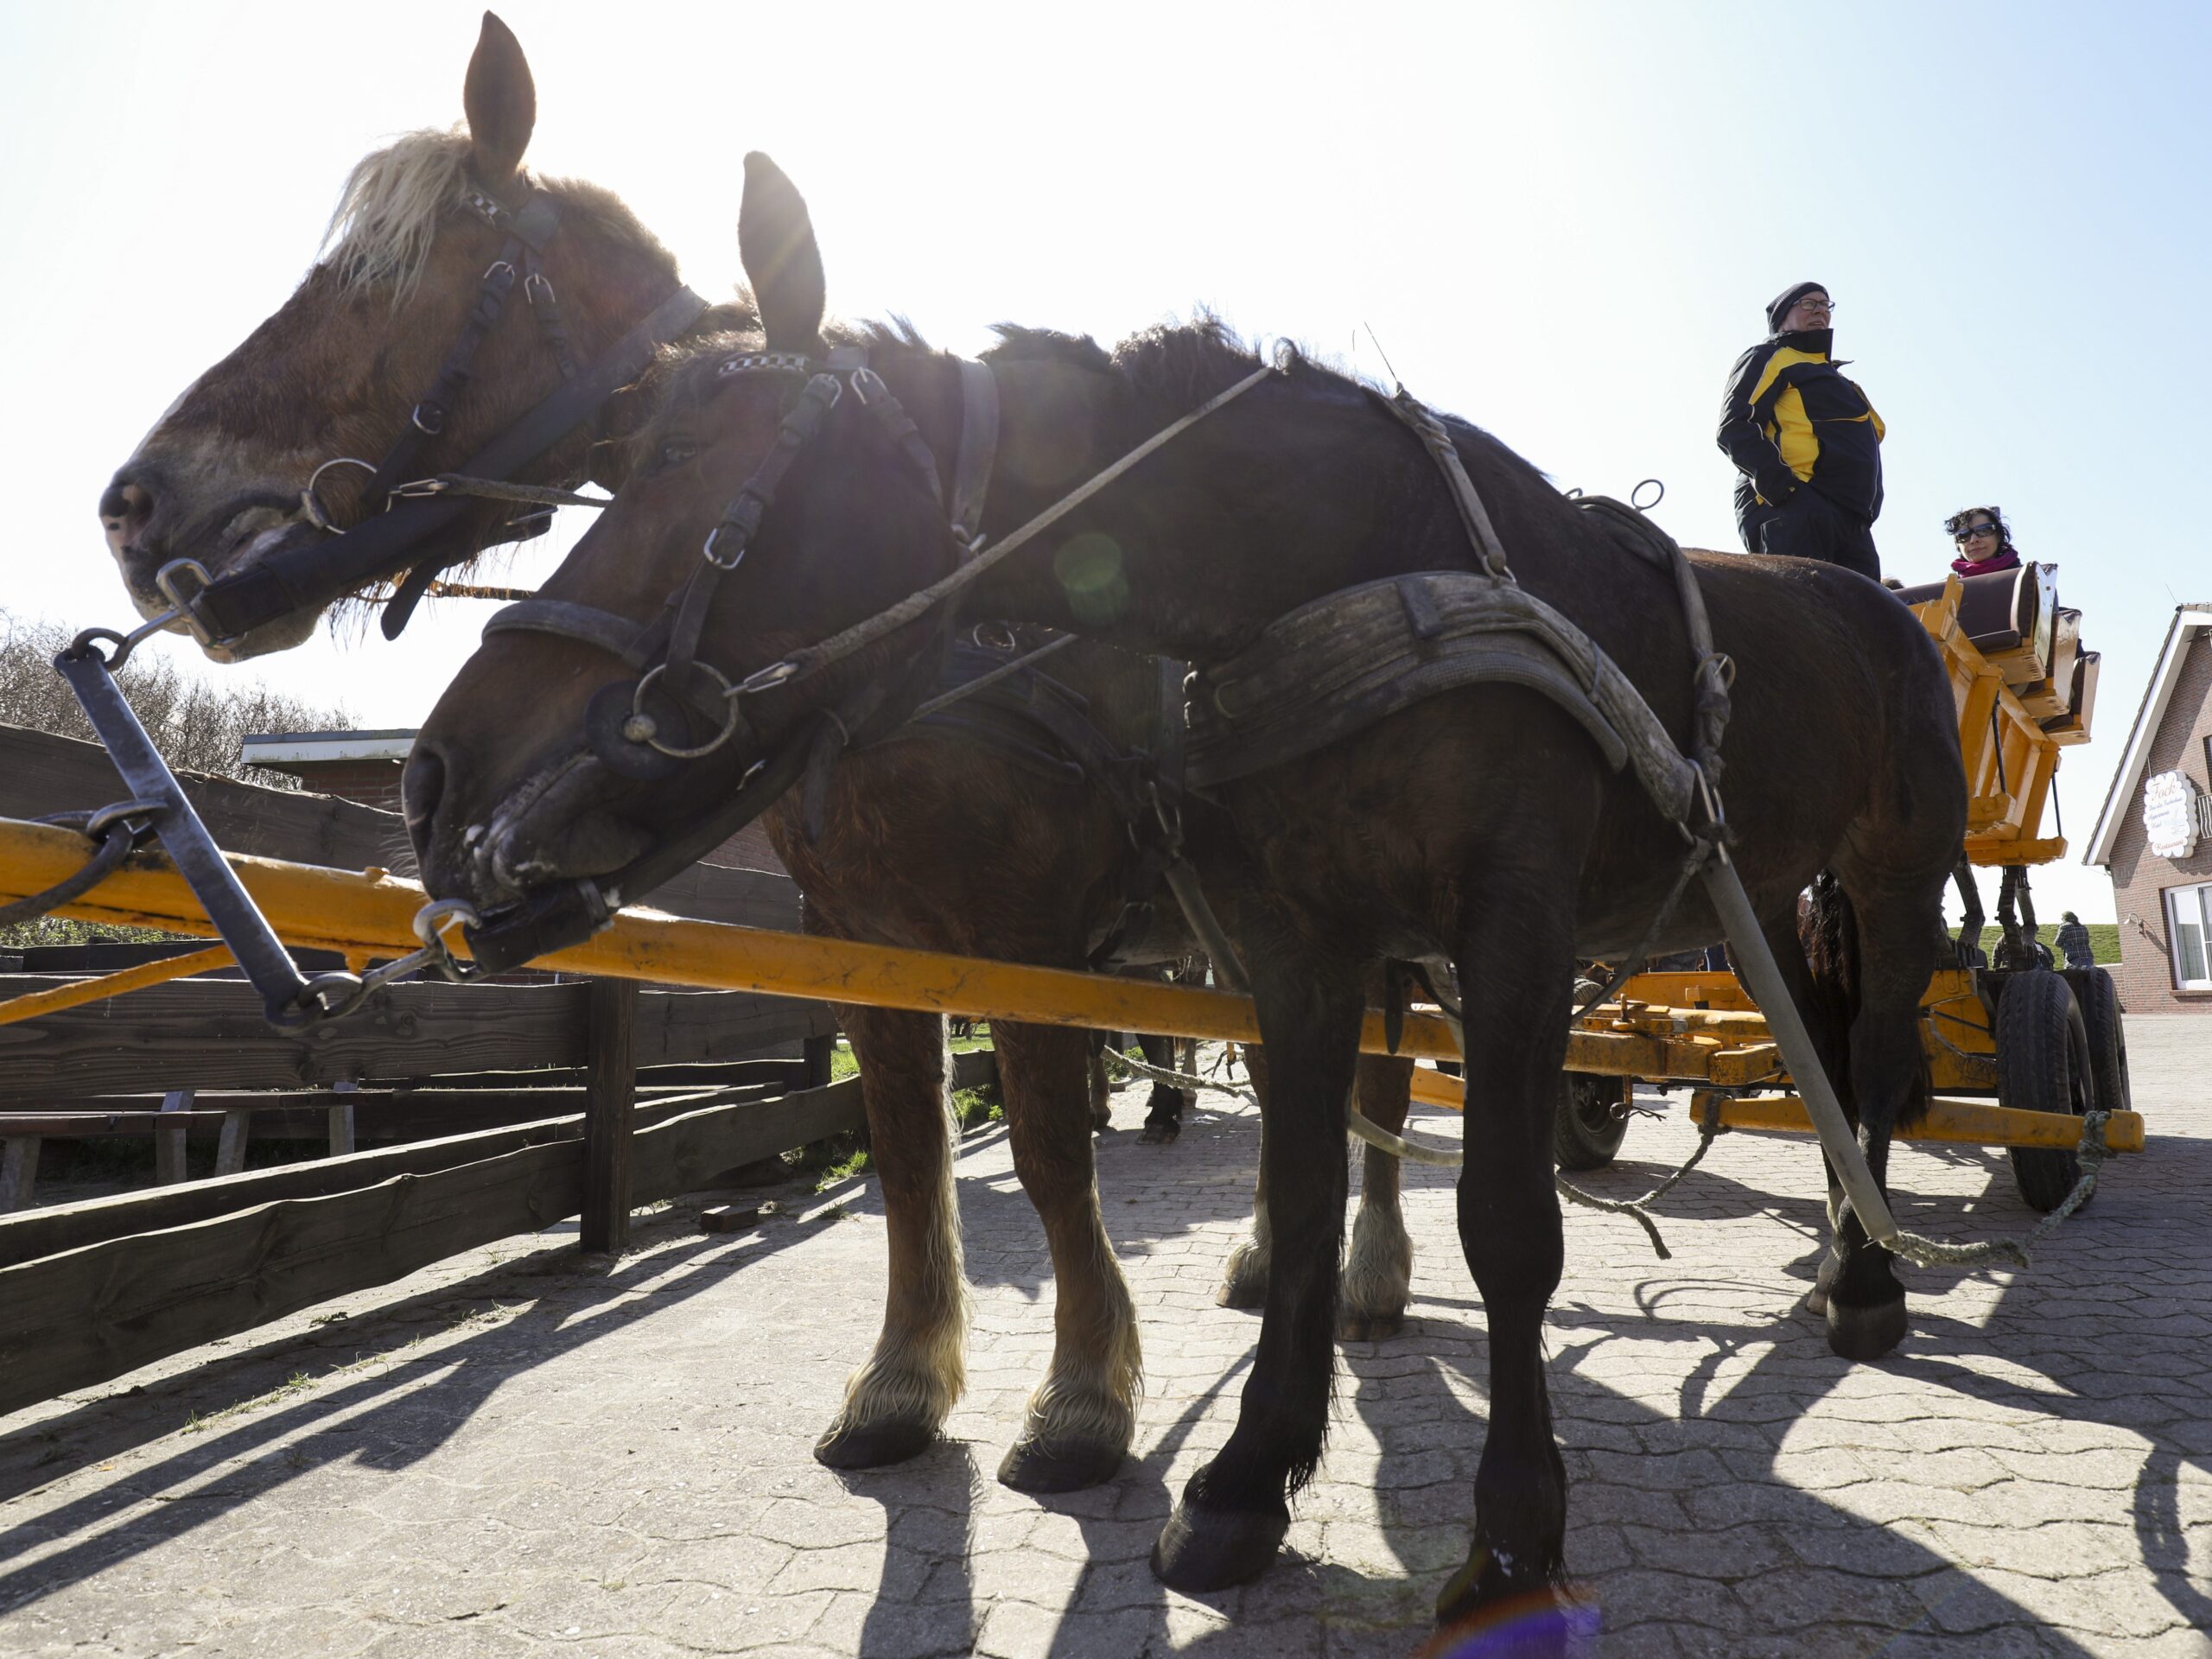 Two brown horses pull a yellow carriage and a man in a black and yellow jackets stand up in the carriage.